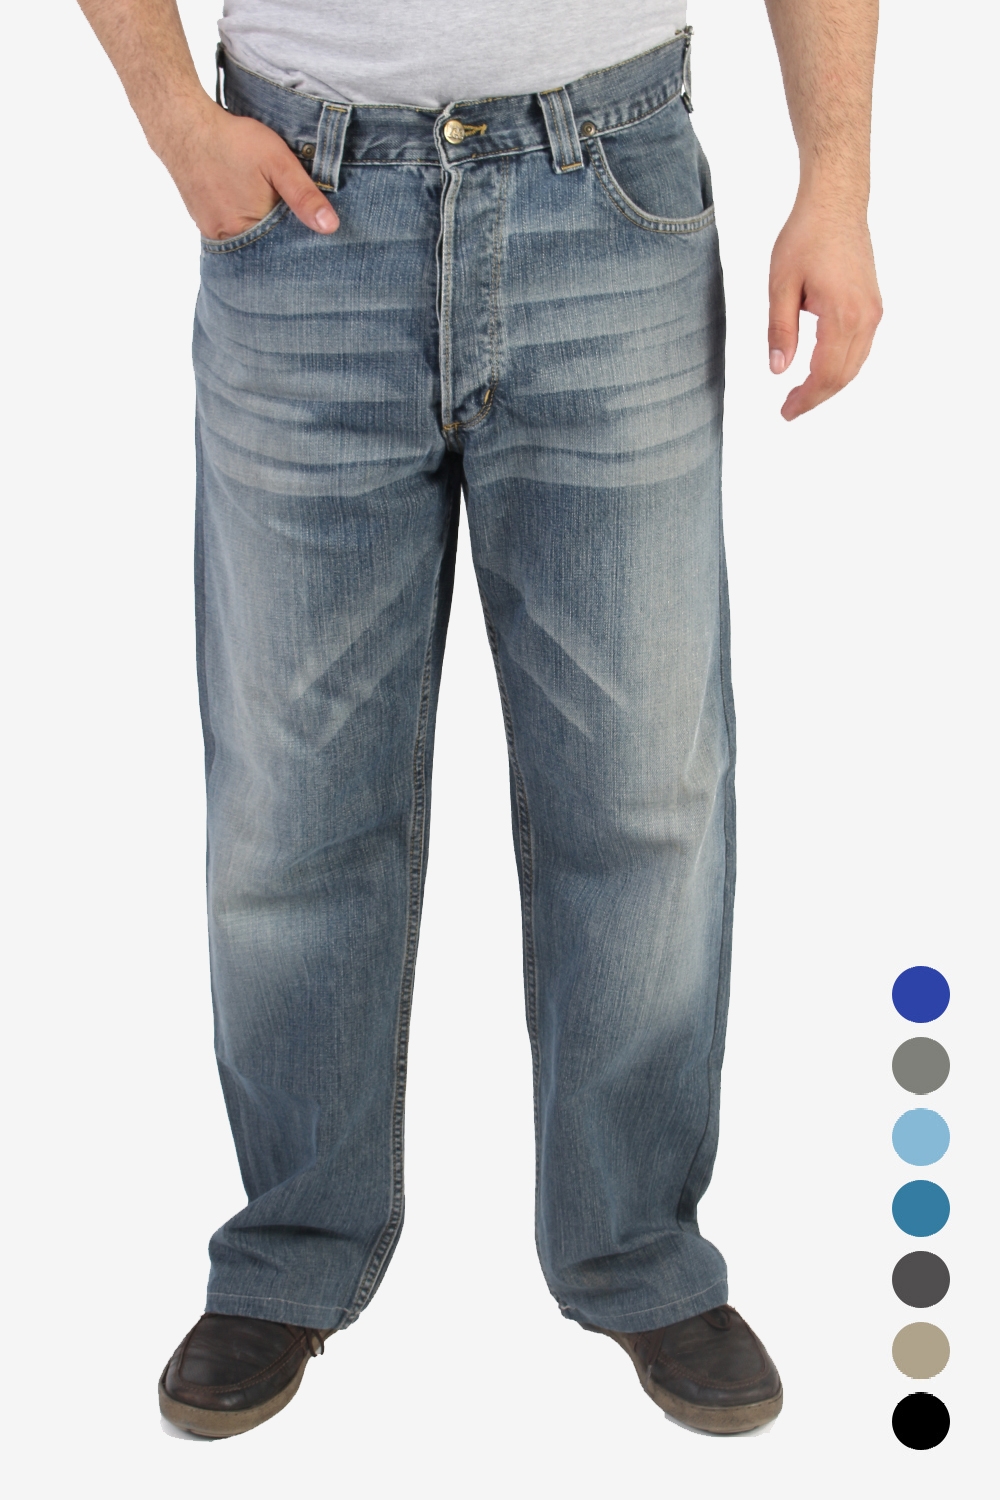 Lee Nash Jeans Relaxed Fit Straight Leg - Pepper Tree London